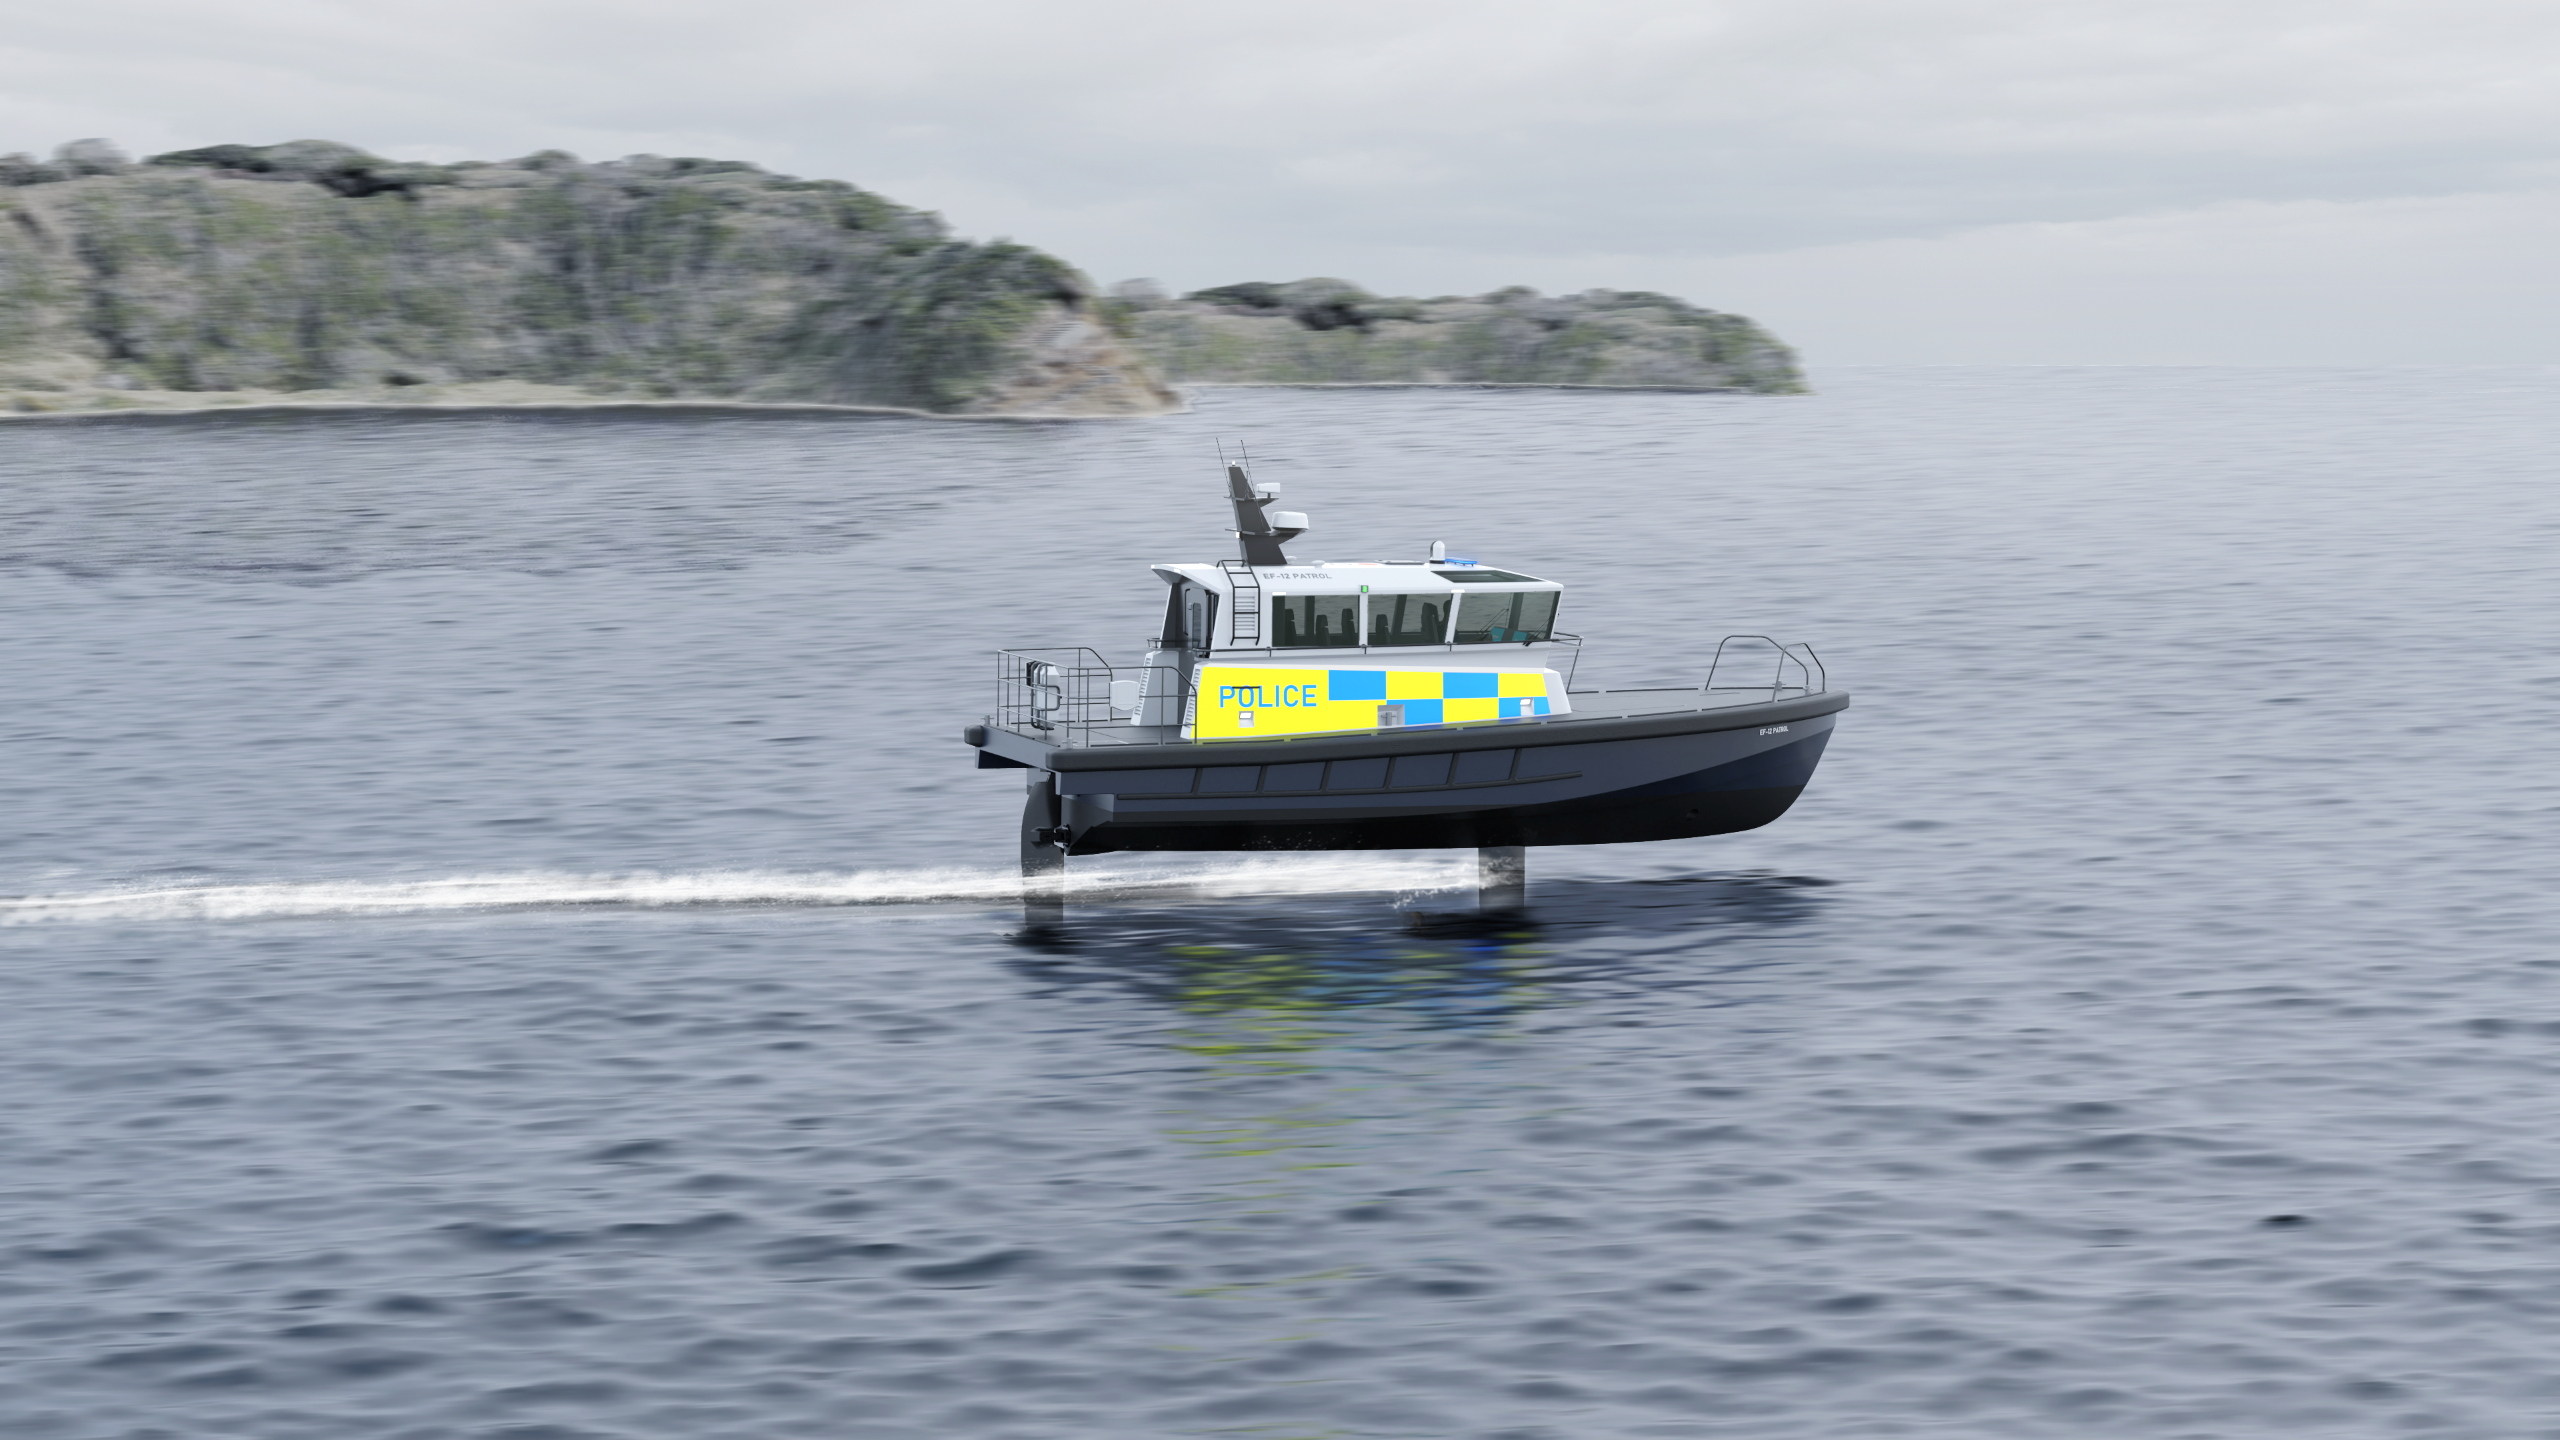 The Artemis EF-12 Patrol boat foiling in the sea near a coastline, on the side of the vessel it says Police and the cabin is yellow and blue